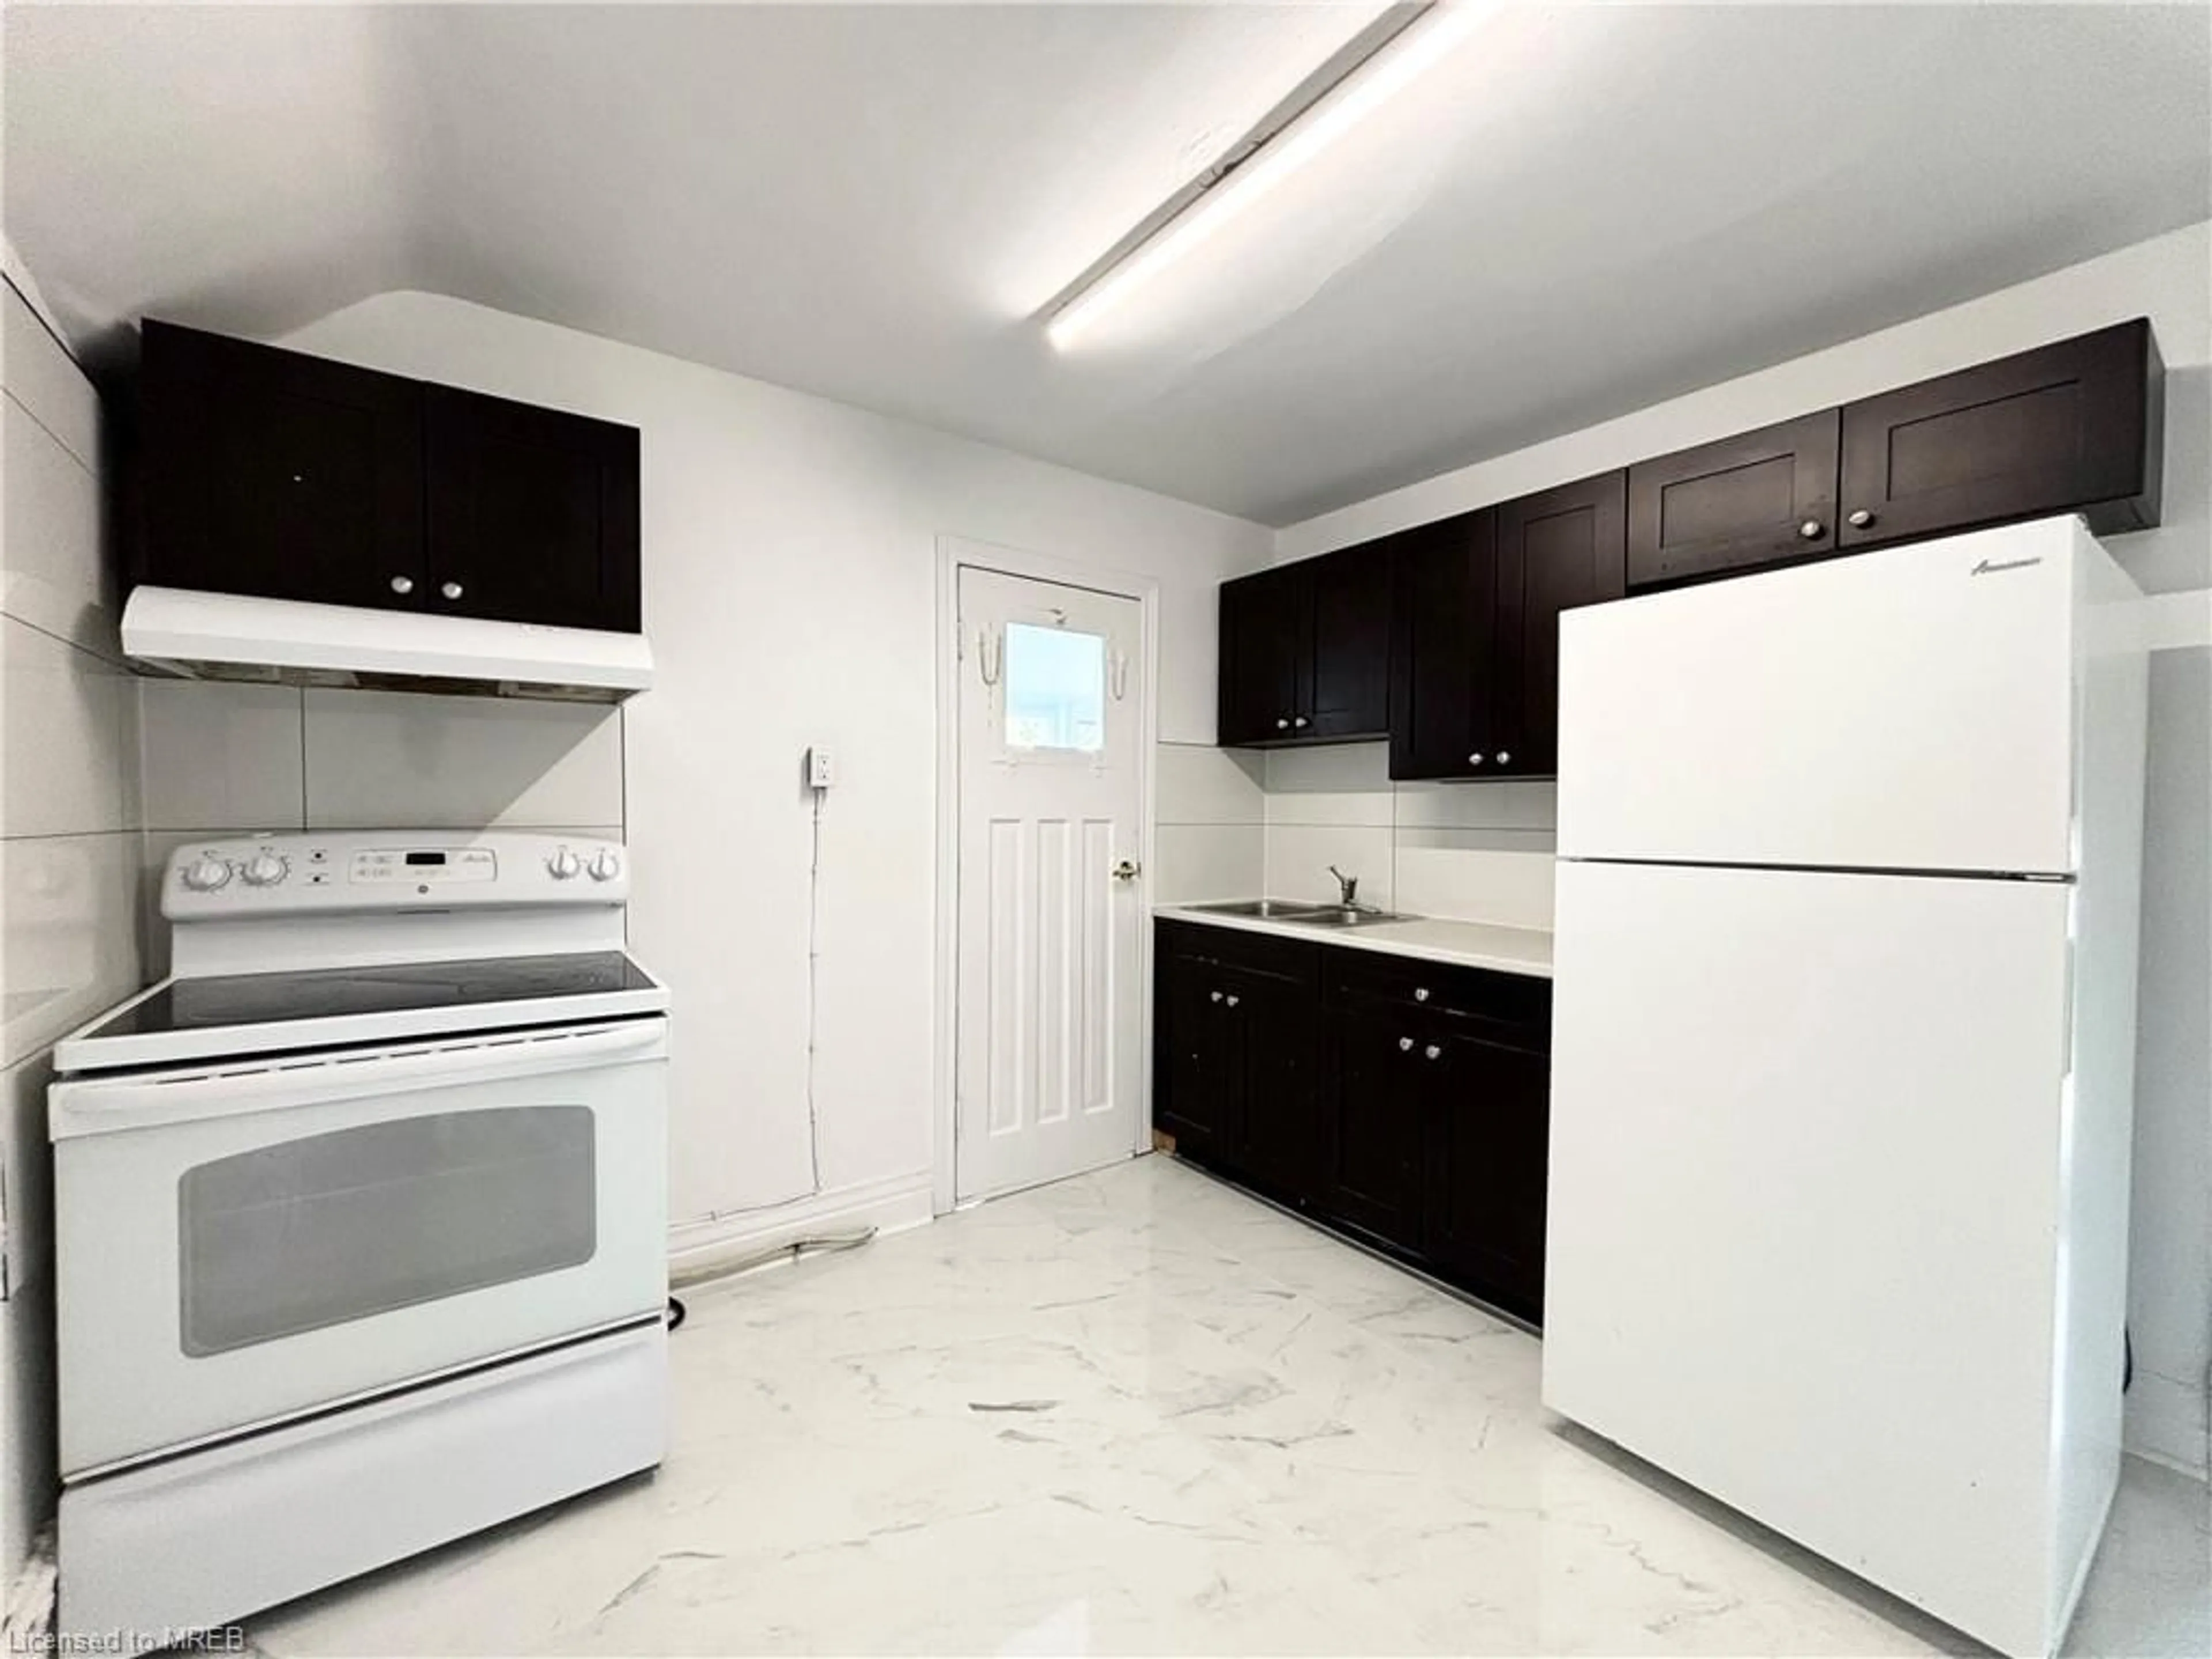 Standard kitchen for 176 Church St, St. Catharines Ontario L2R 3E7